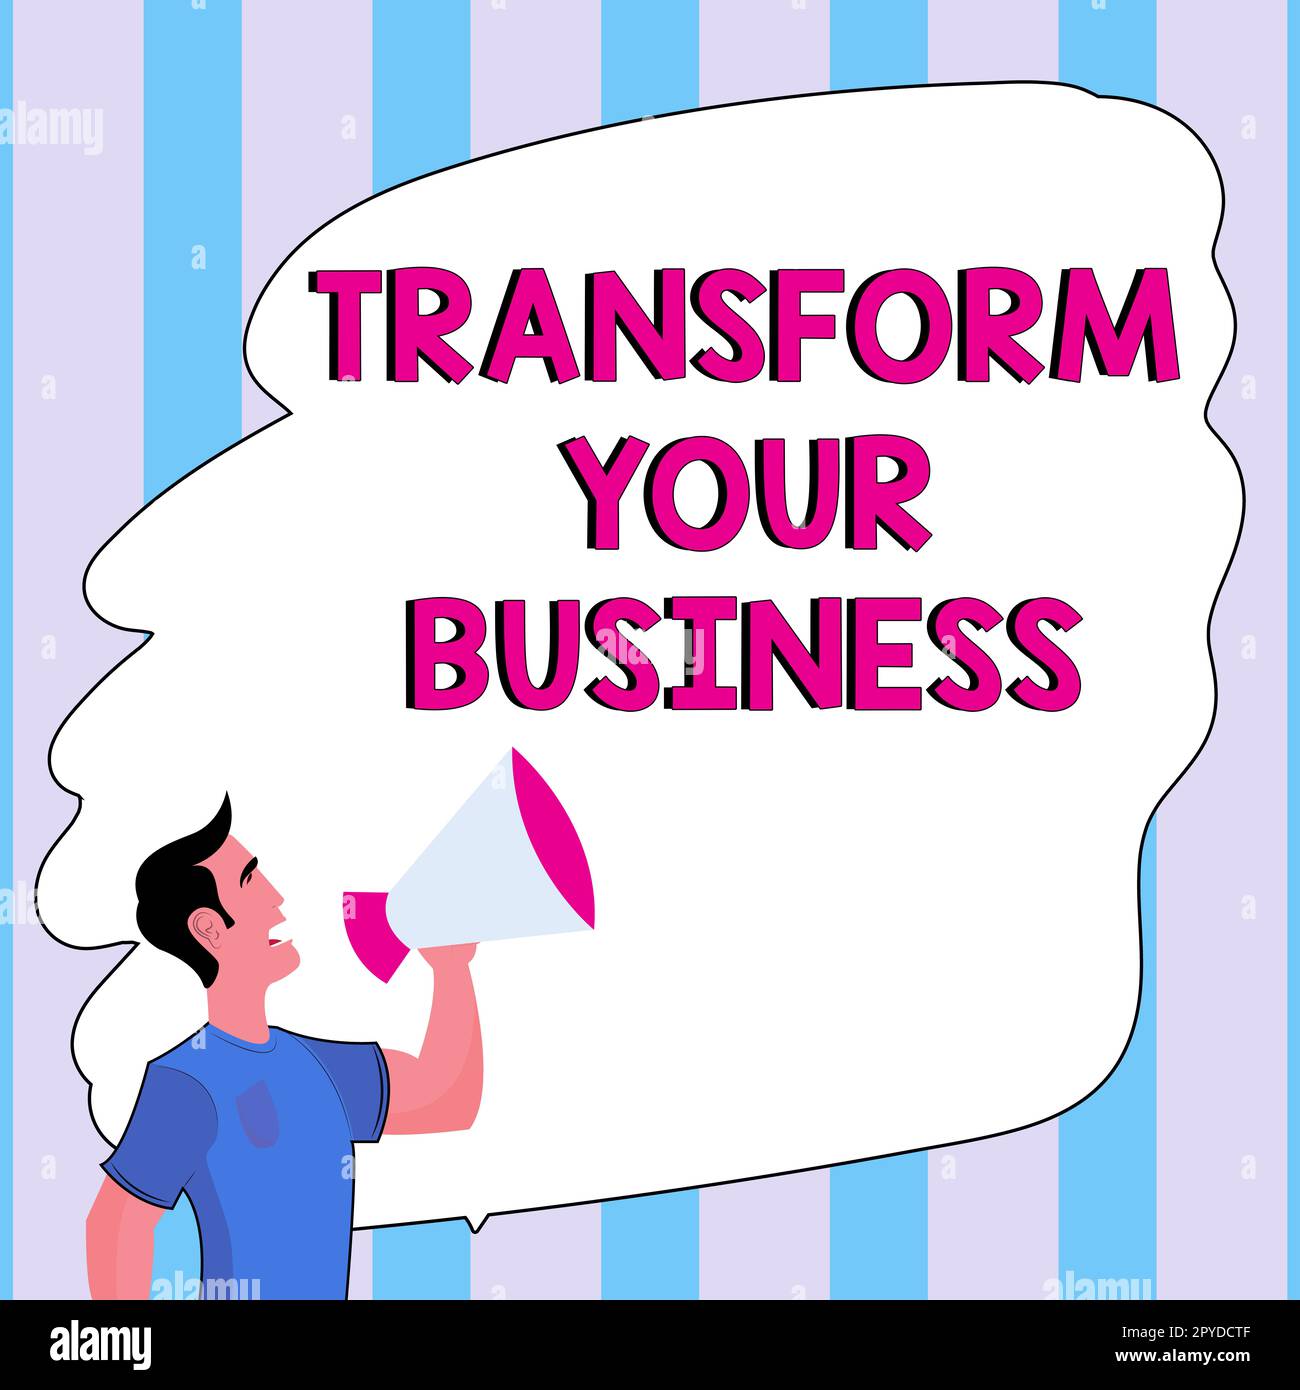 Sign displaying Transform Your Business. Business approach Modify energy on innovation and sustainable growth Stock Photo